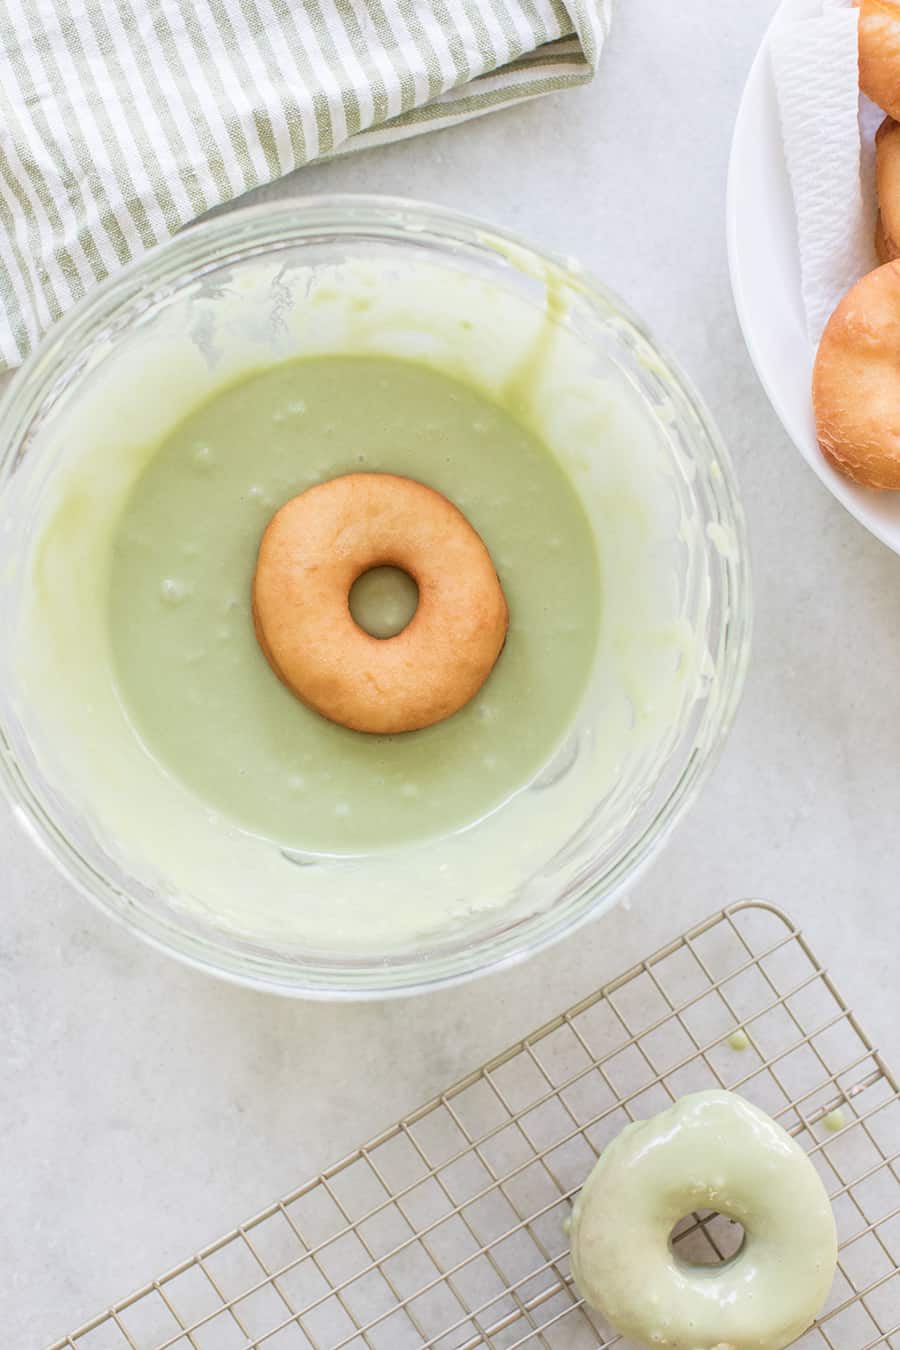 homemade donut being dipped into a white chocolate matcha glaze